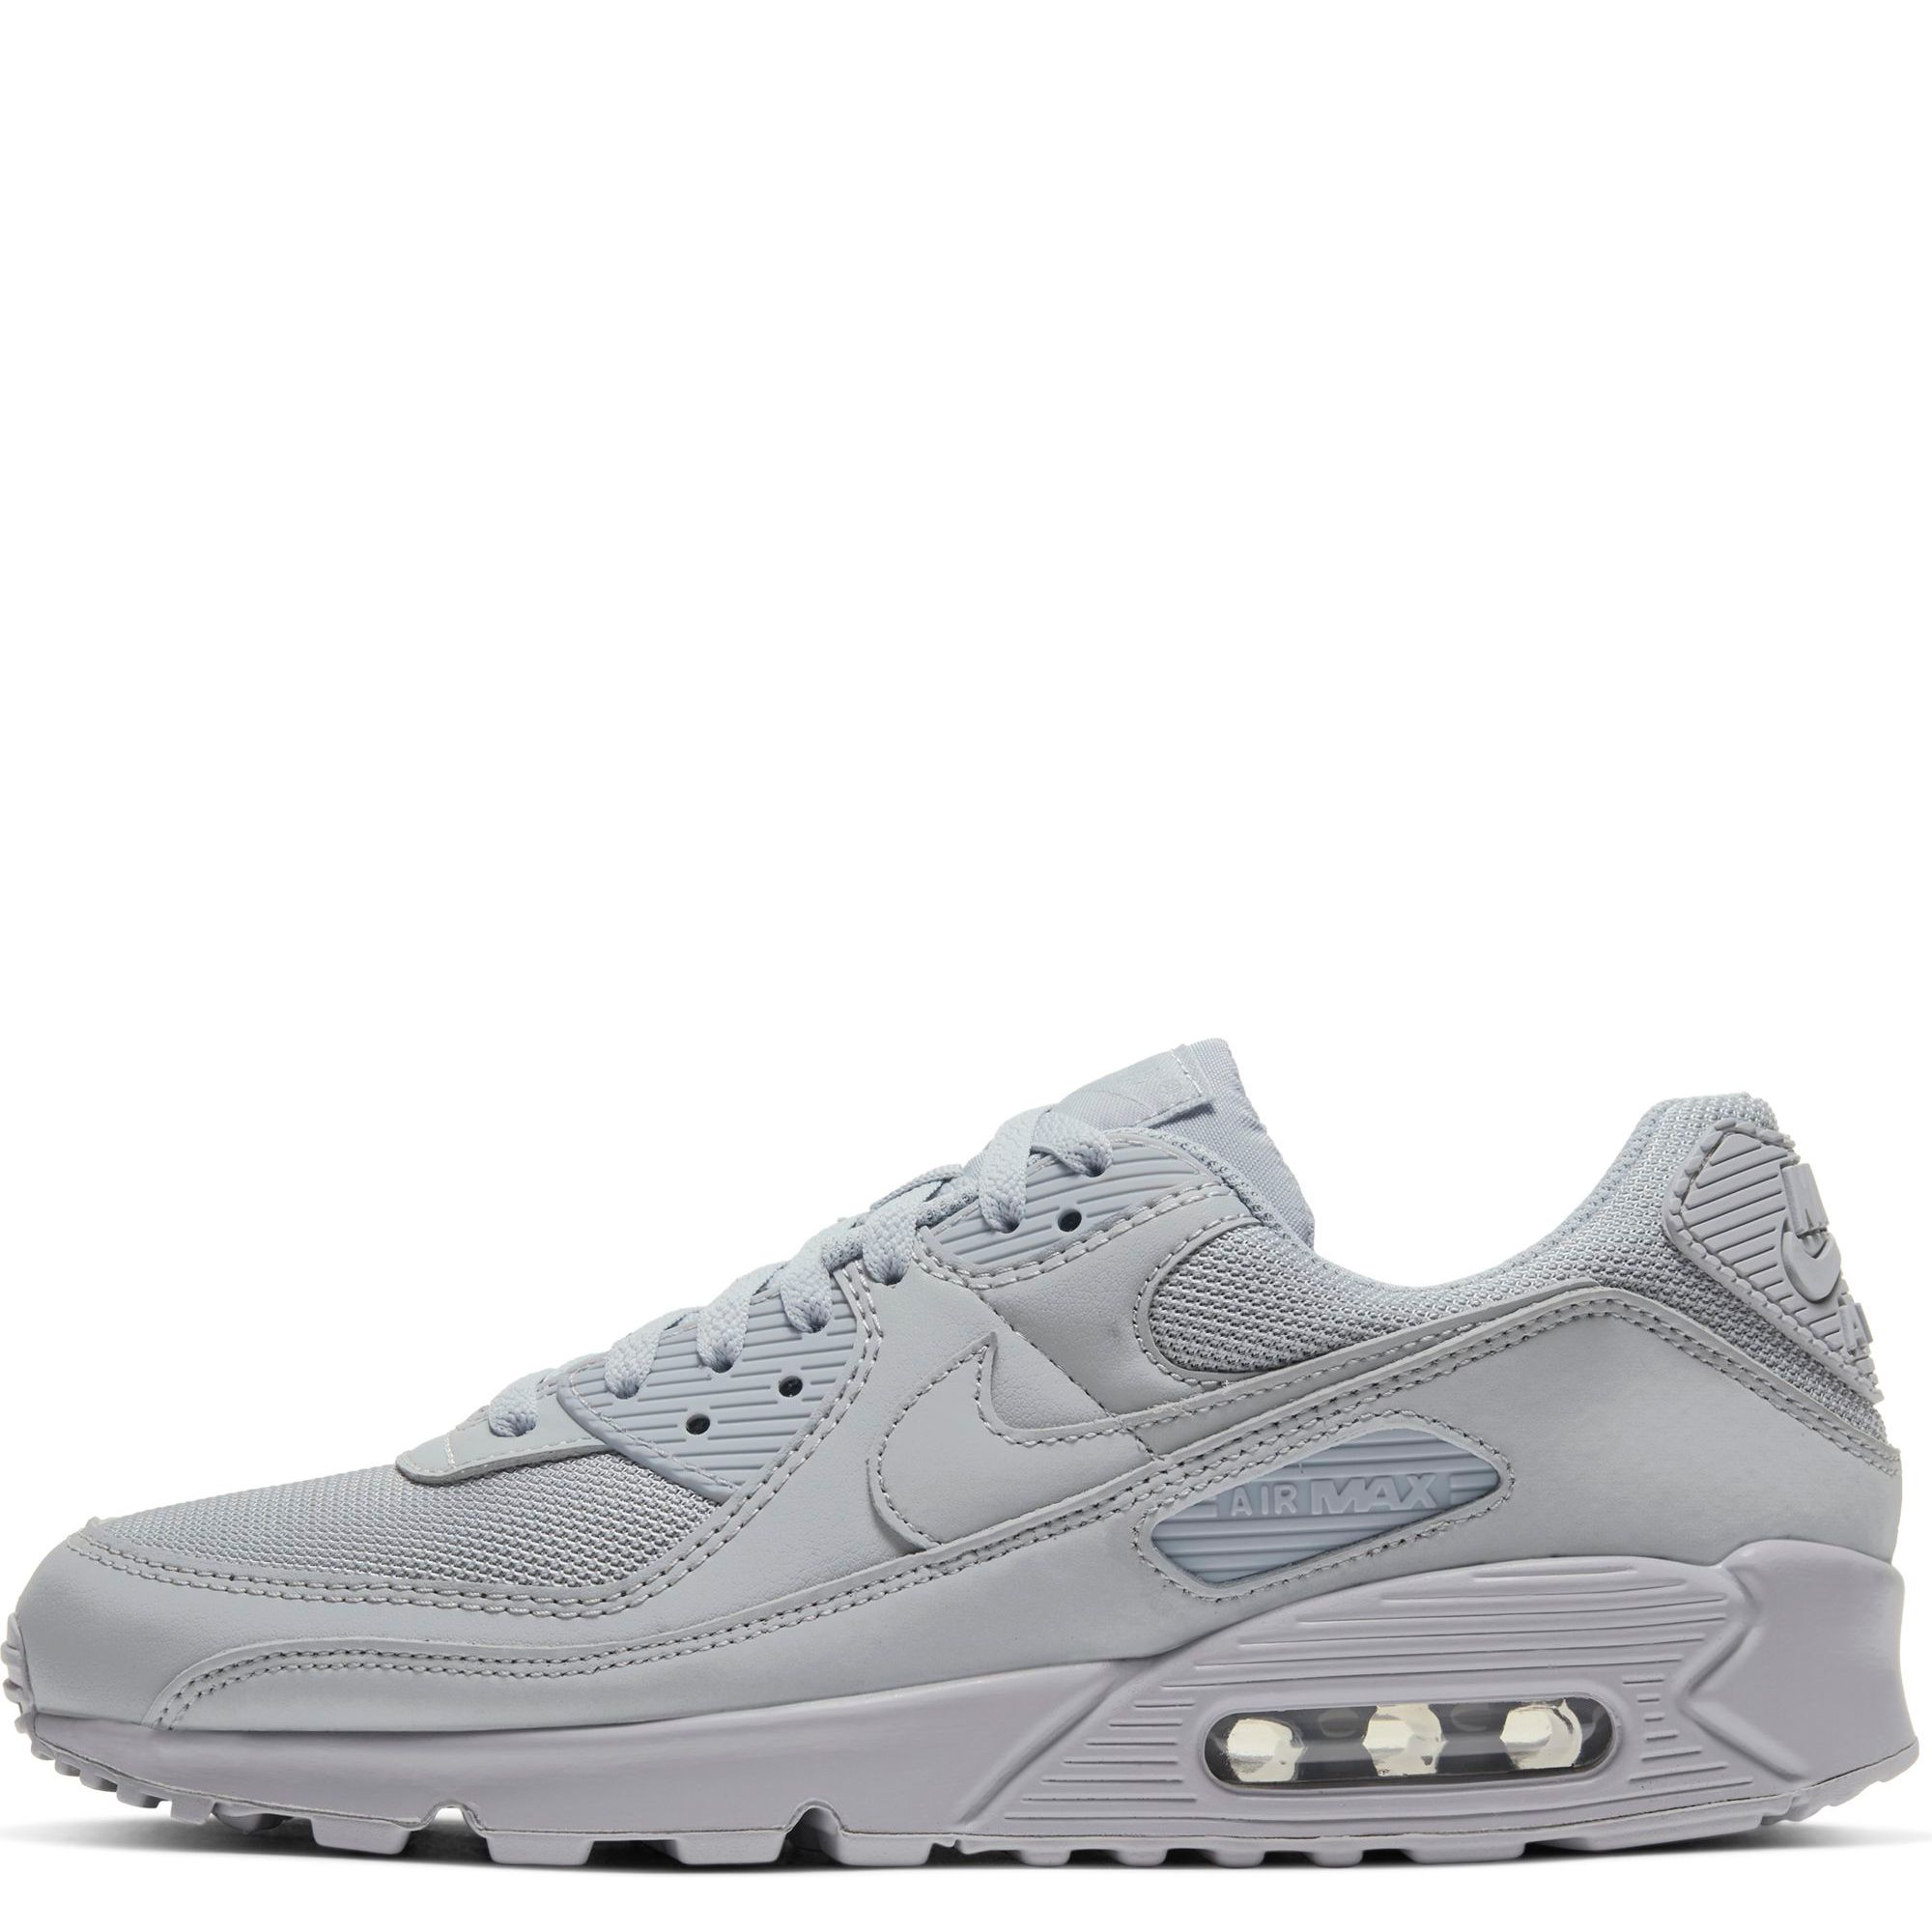 wolf grey and white air max 90